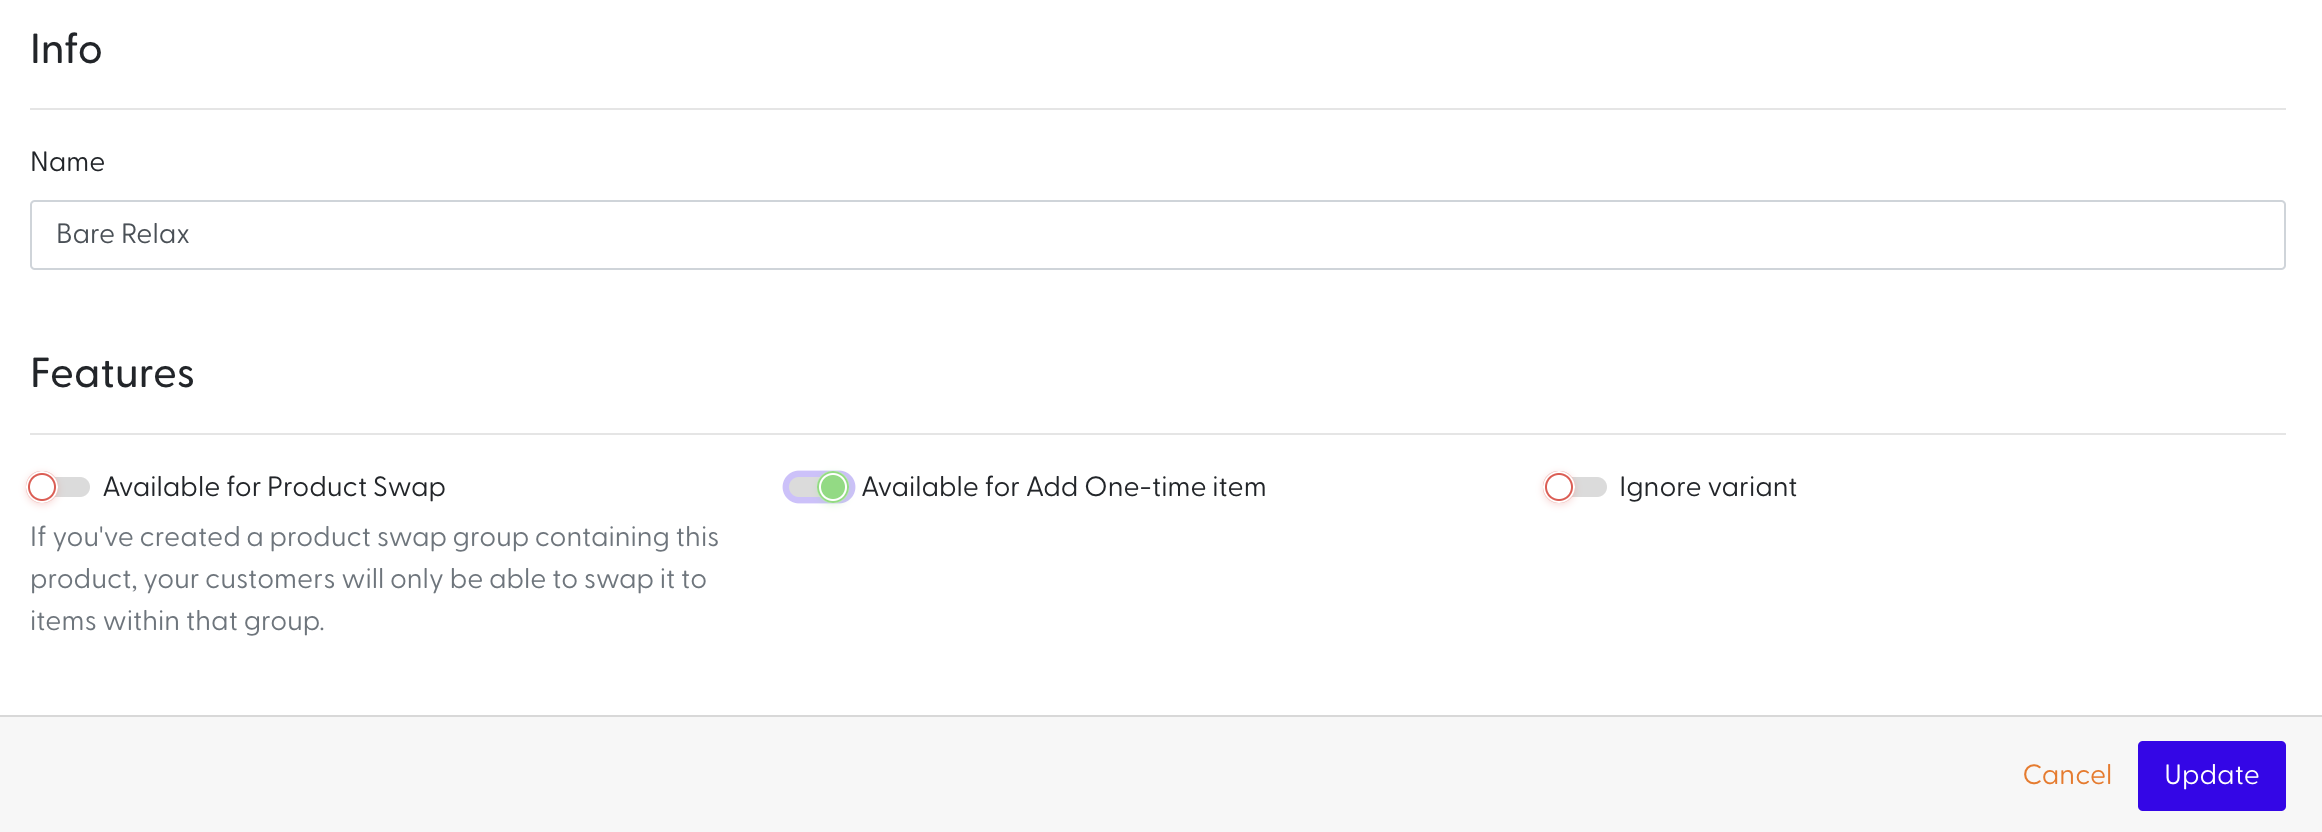 add one-time item option